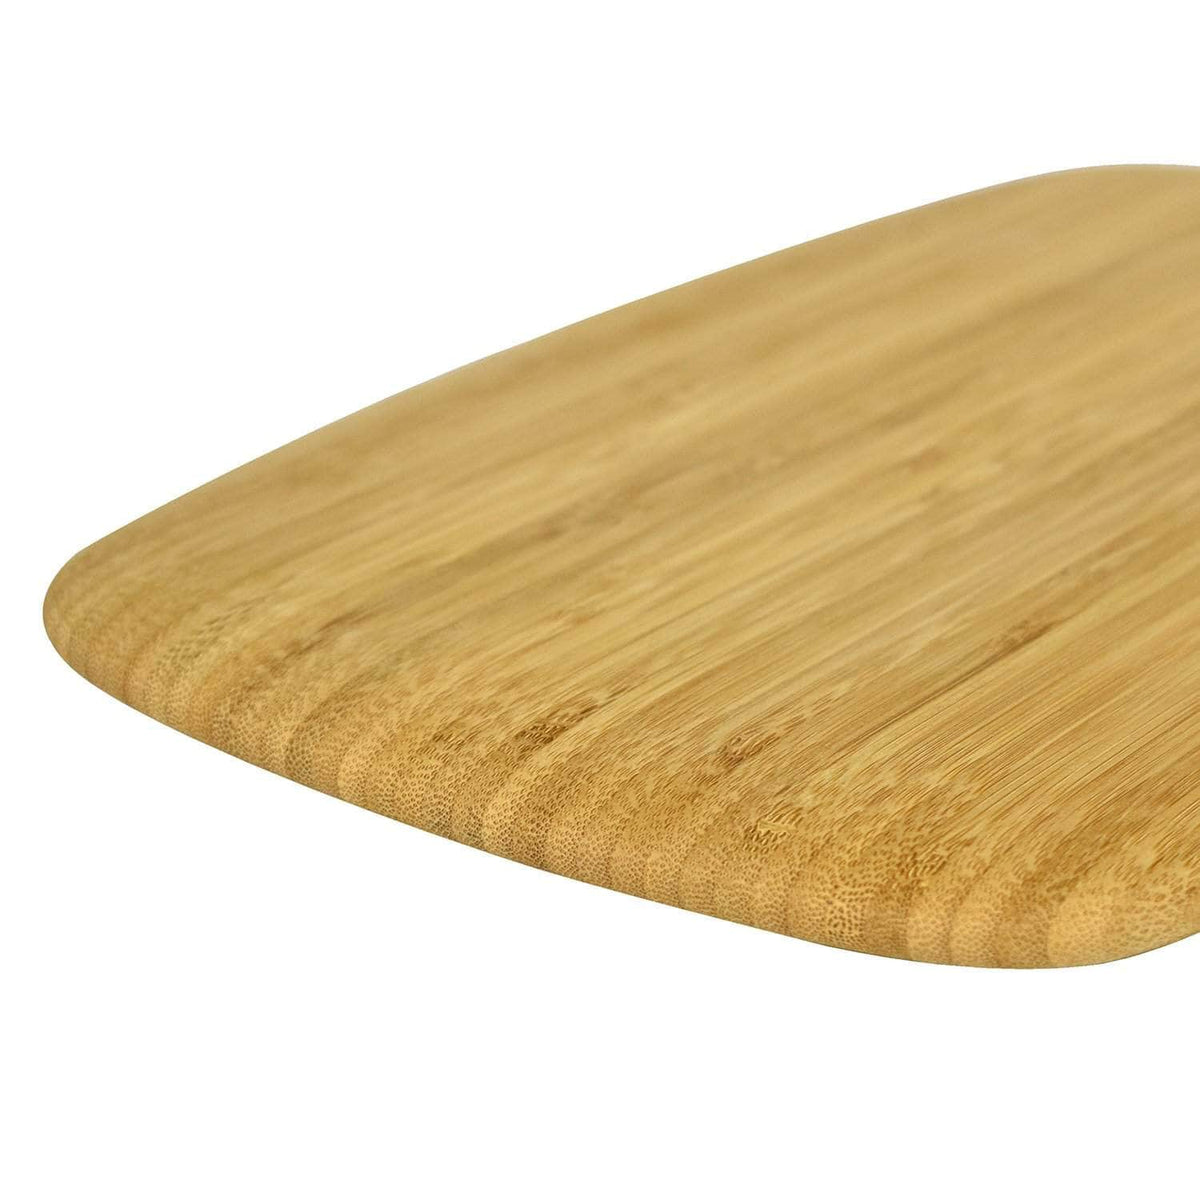 *NEW* Classic bamboo cutting &amp; serving boards